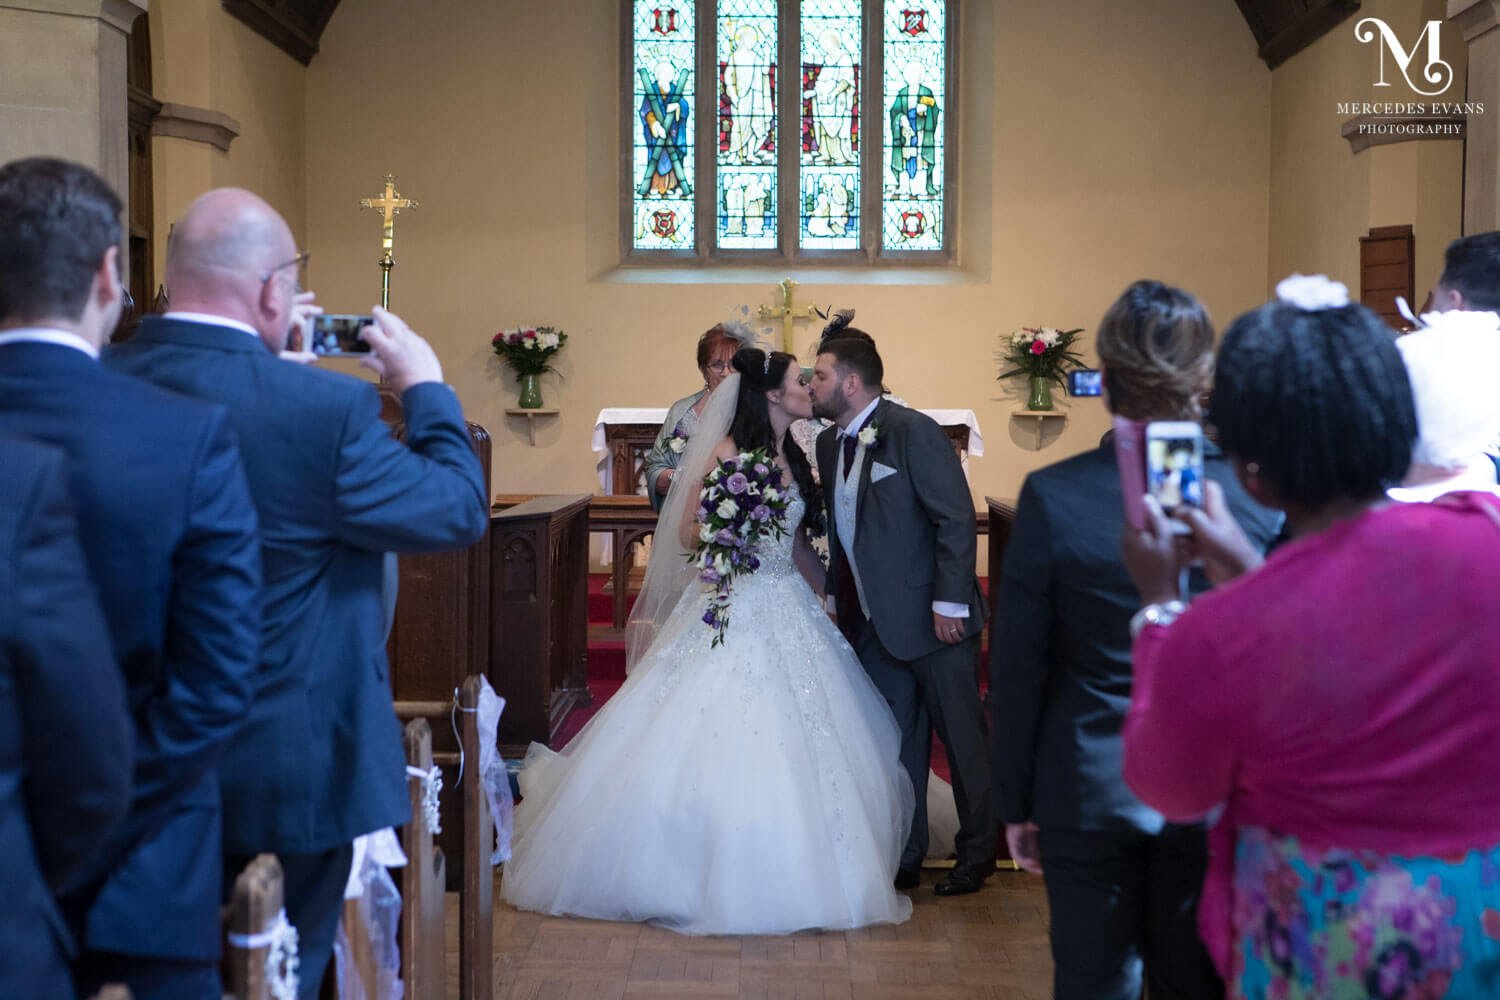 The newly weds kiss in St Andrew's church in Frimley